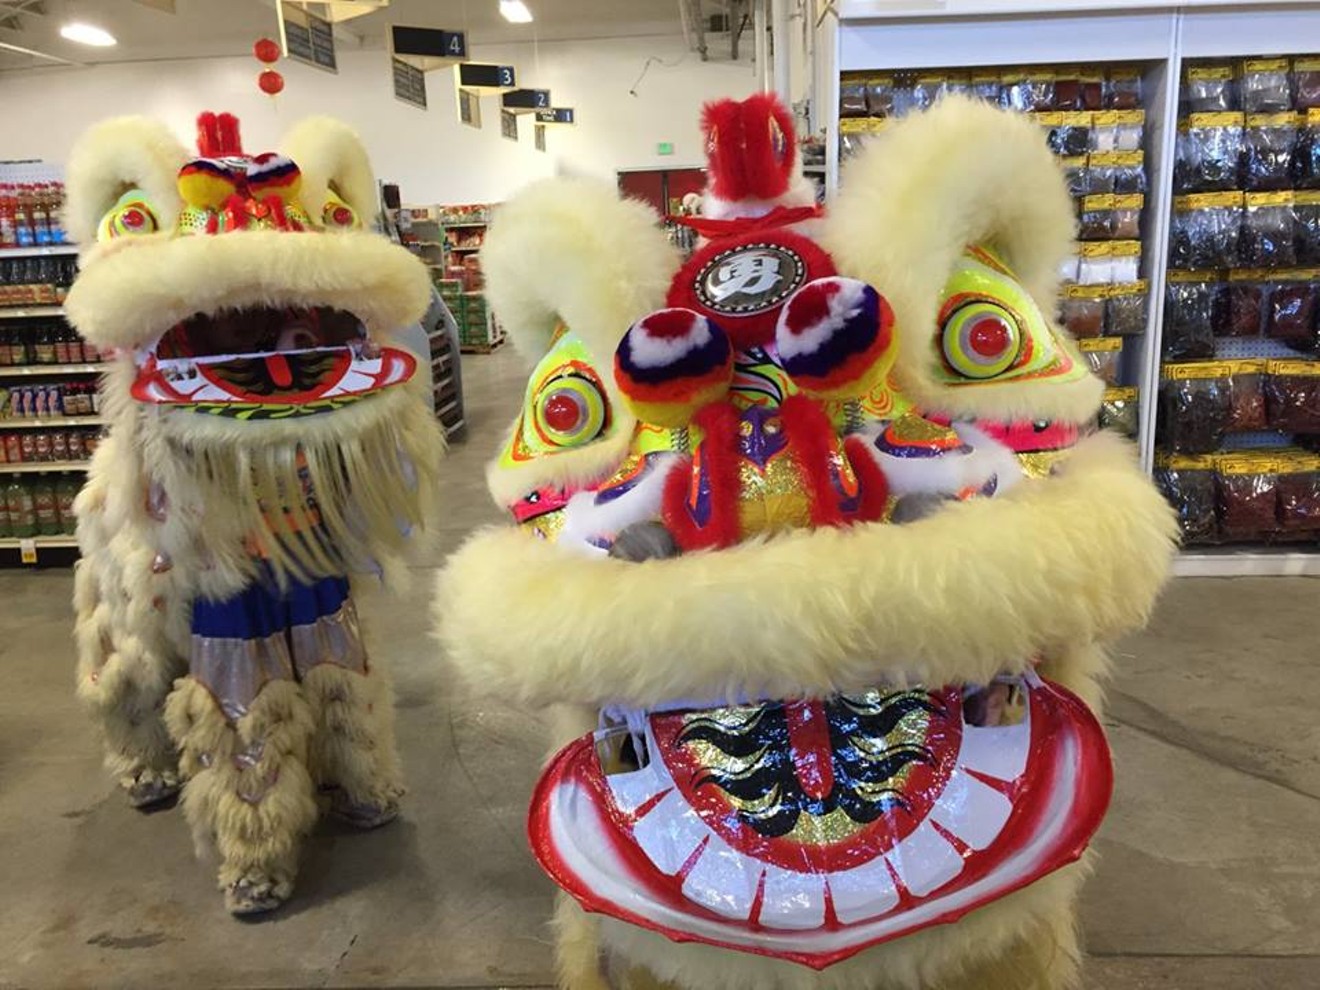 It's a Chinese New Year celebration in Park Hill this weekend.